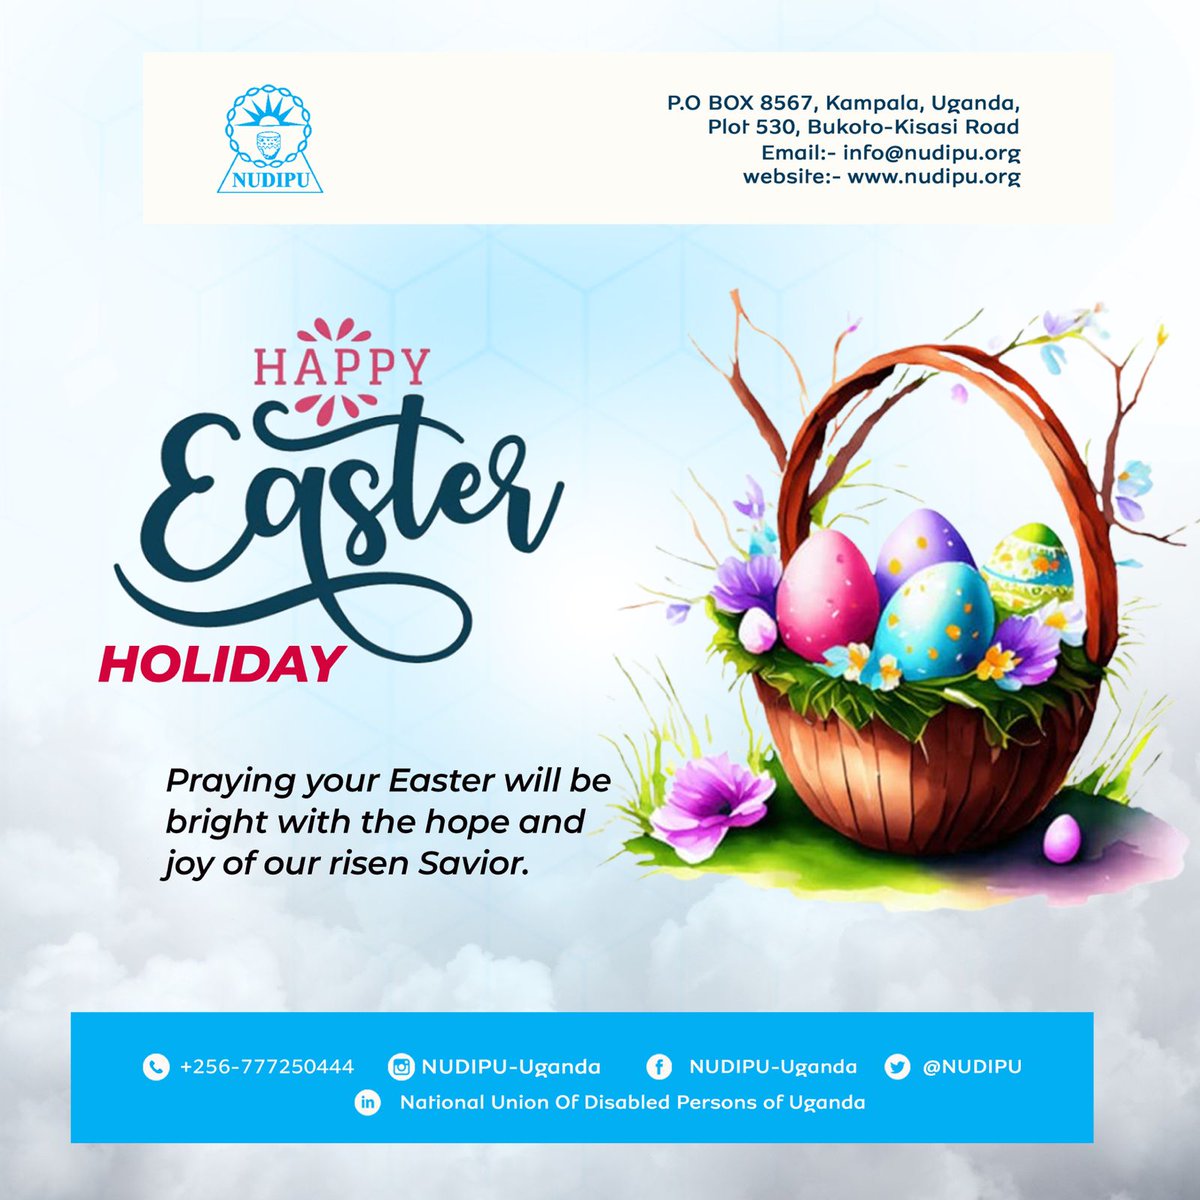 We wish you a happy Easter to you all. May this holiday bring you joy as we celebrate the risen Lord 🙏. @EstherKyozira